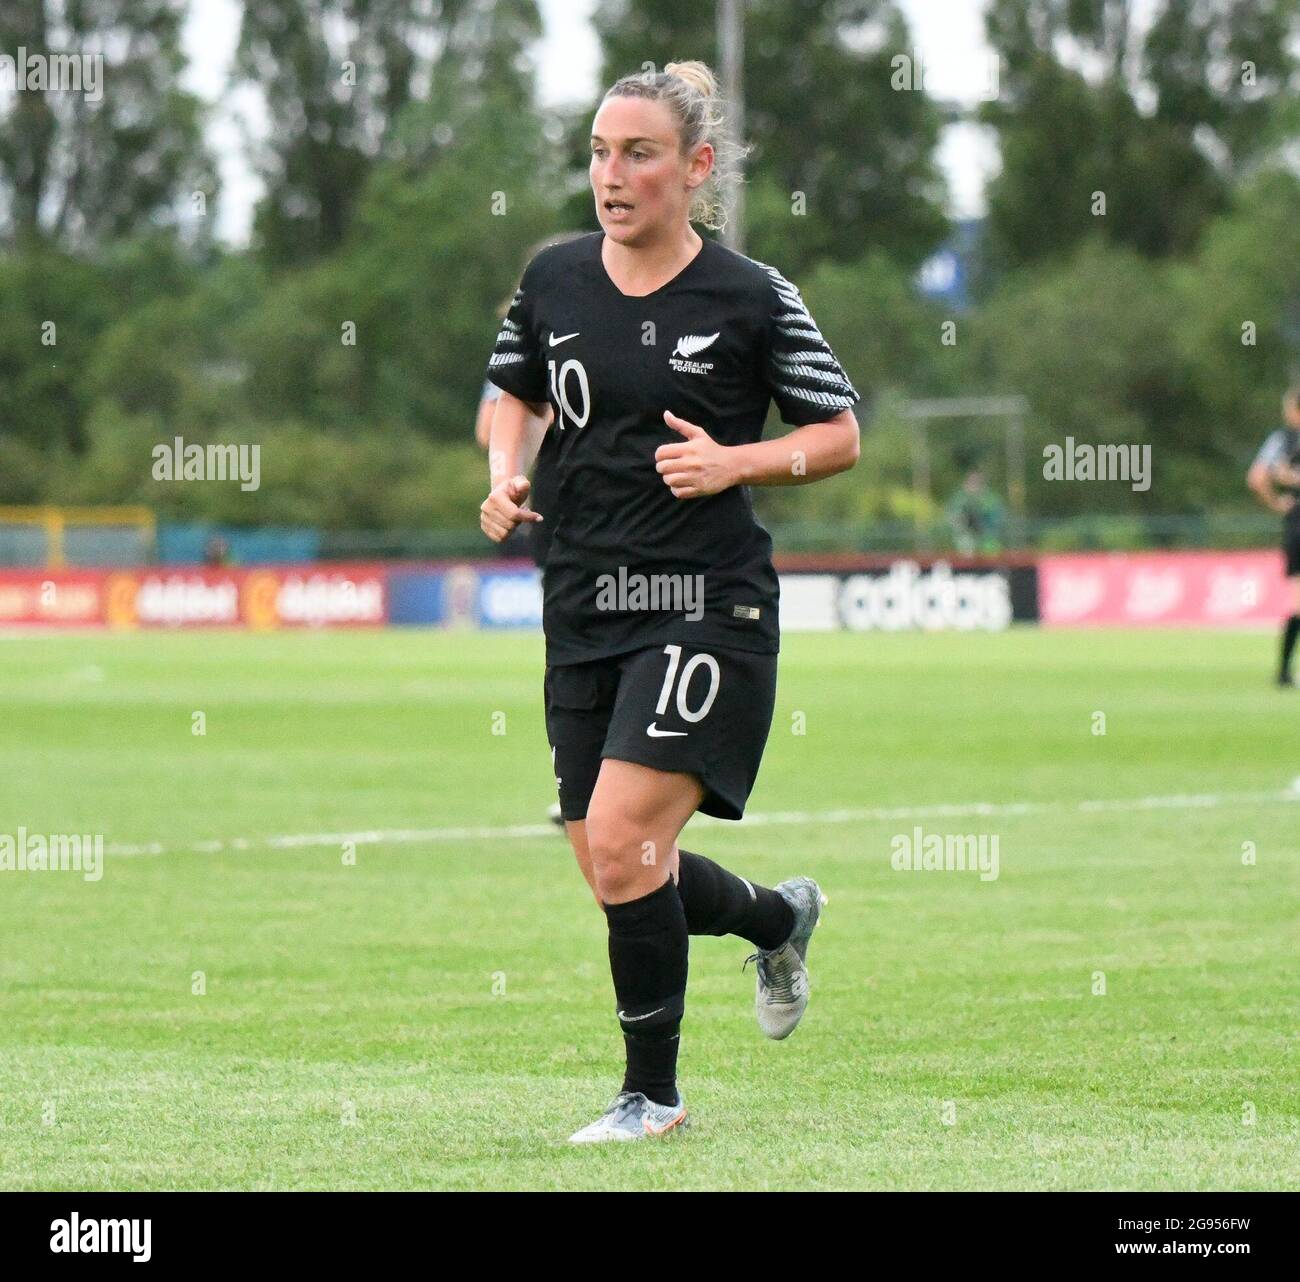 Cardiff, Wales. 4 June, 2019. Annalie Longo of New Zealand Women in action during the Women's International Friendly match between Wales Women and New Zealand Women at Cardiff International Sports Campus, Cardiff, Wales on 4 June, 2019. Credit: Duncan Thomas/Majestic Media. Stock Photo